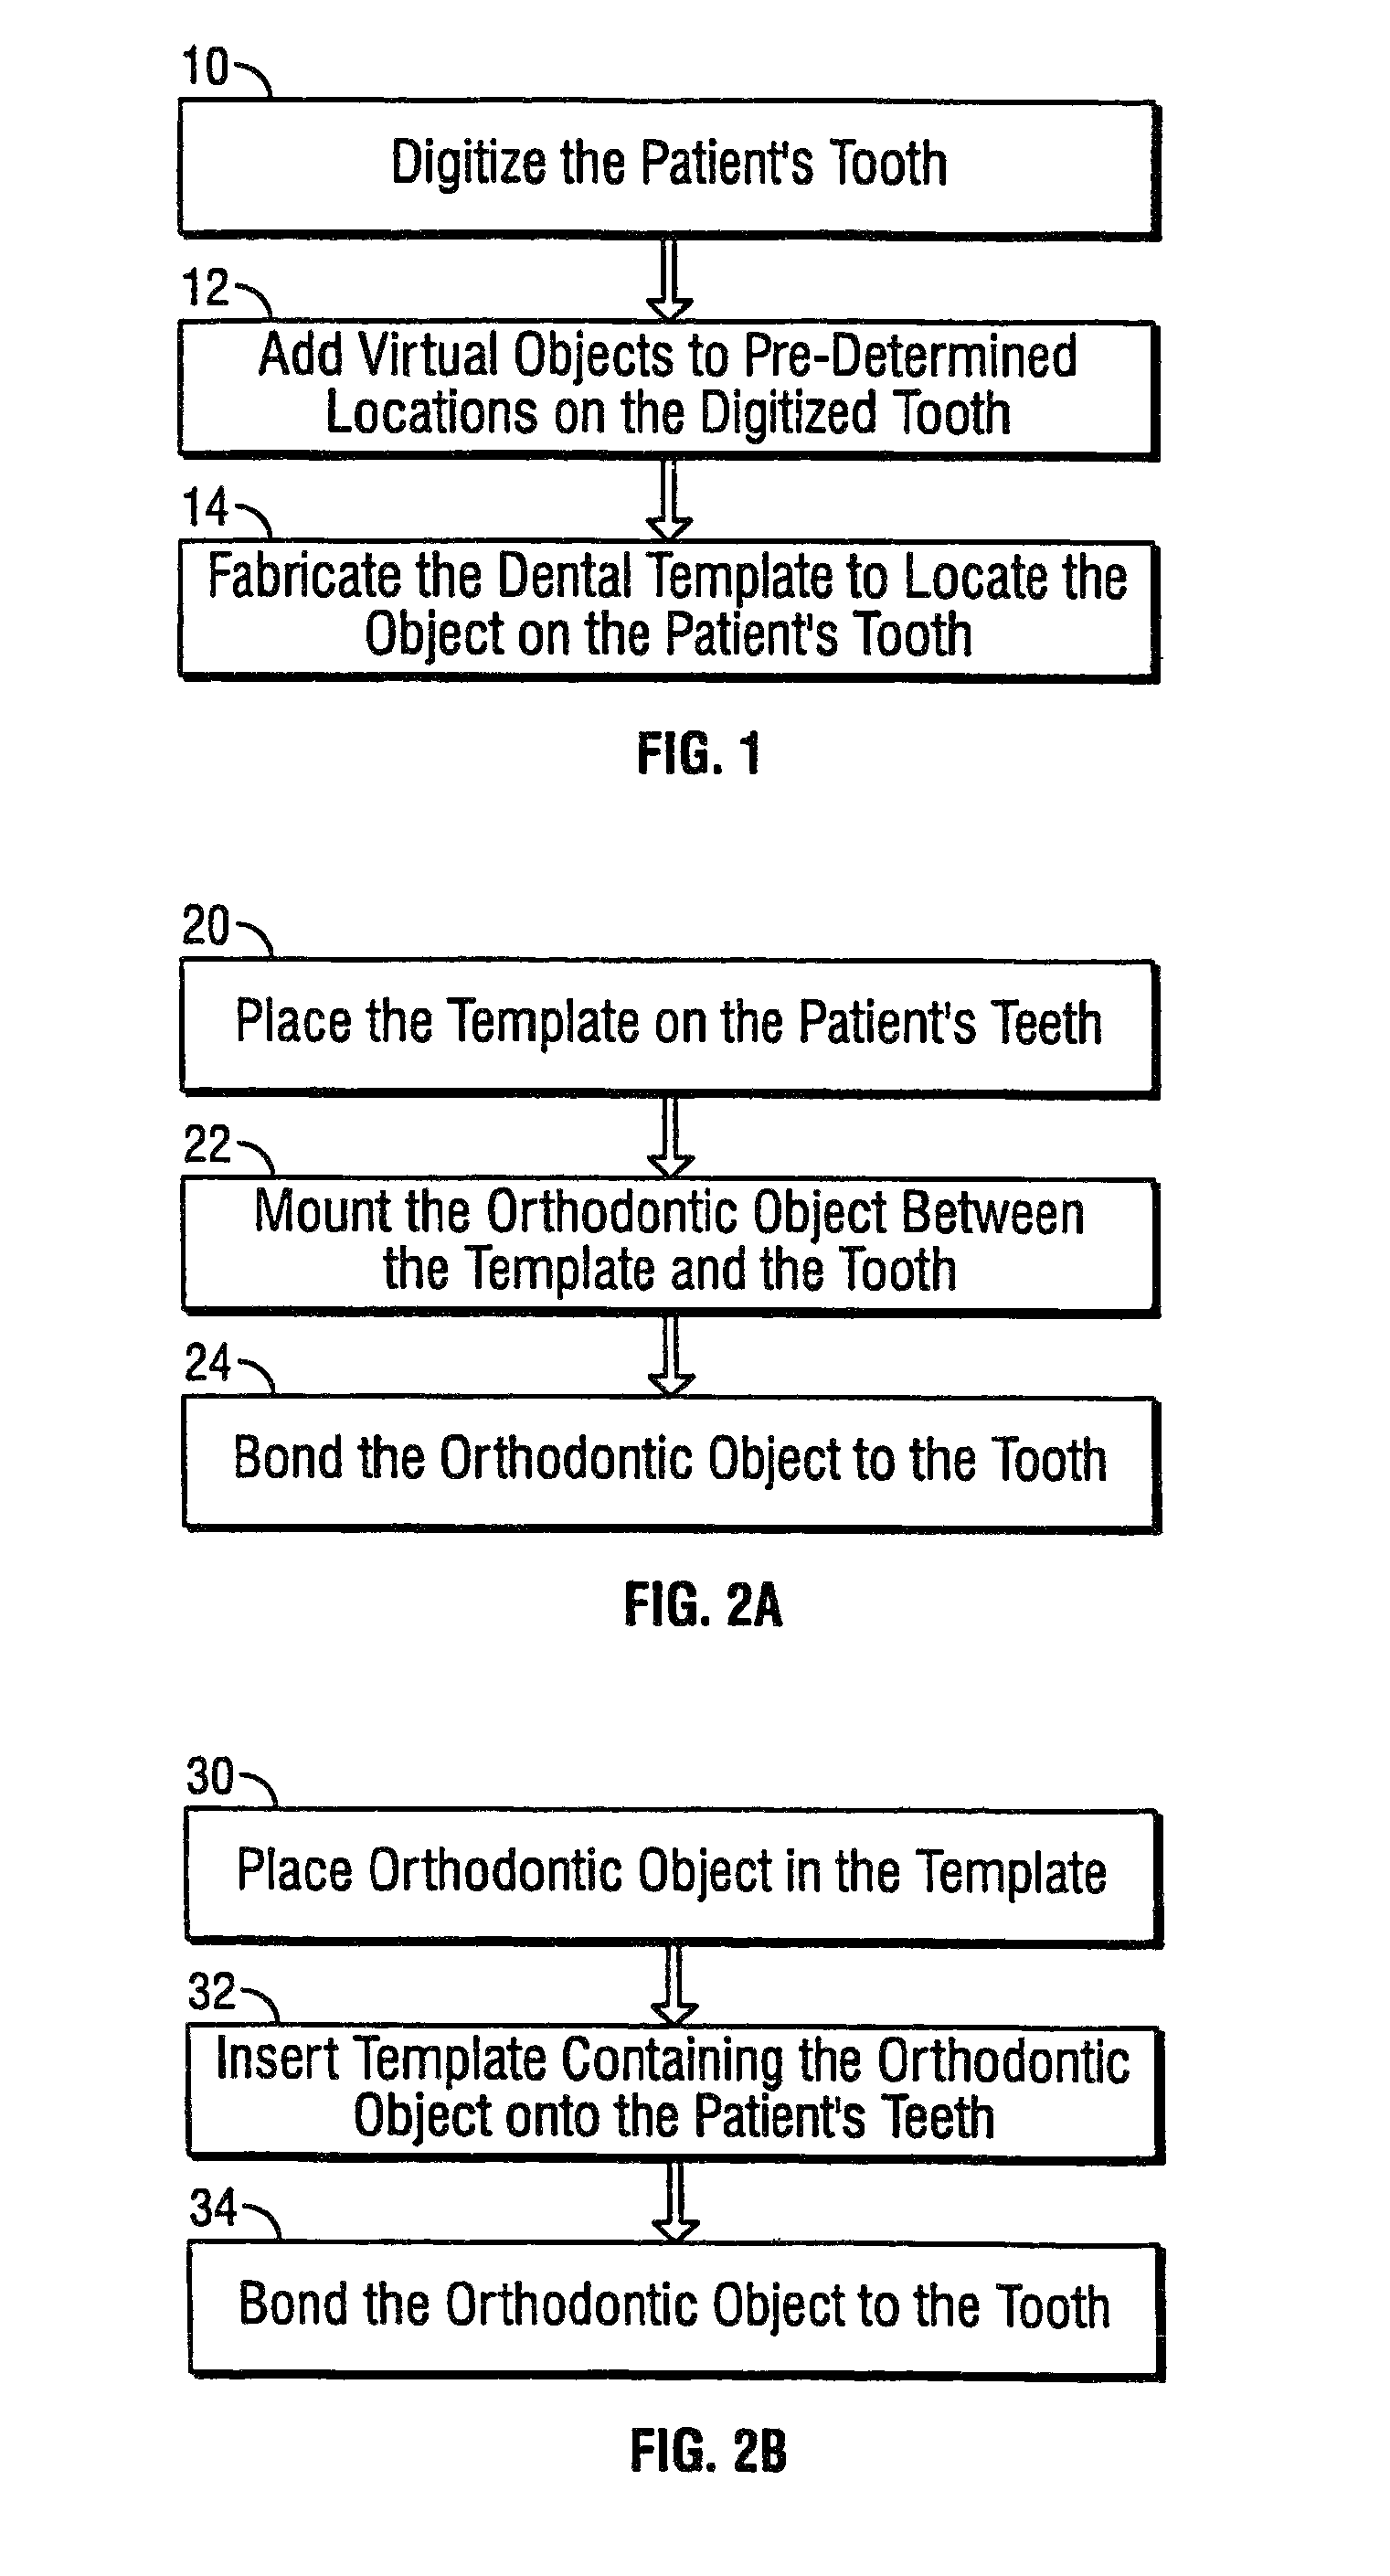 Systems and methods for fabricating a dental template